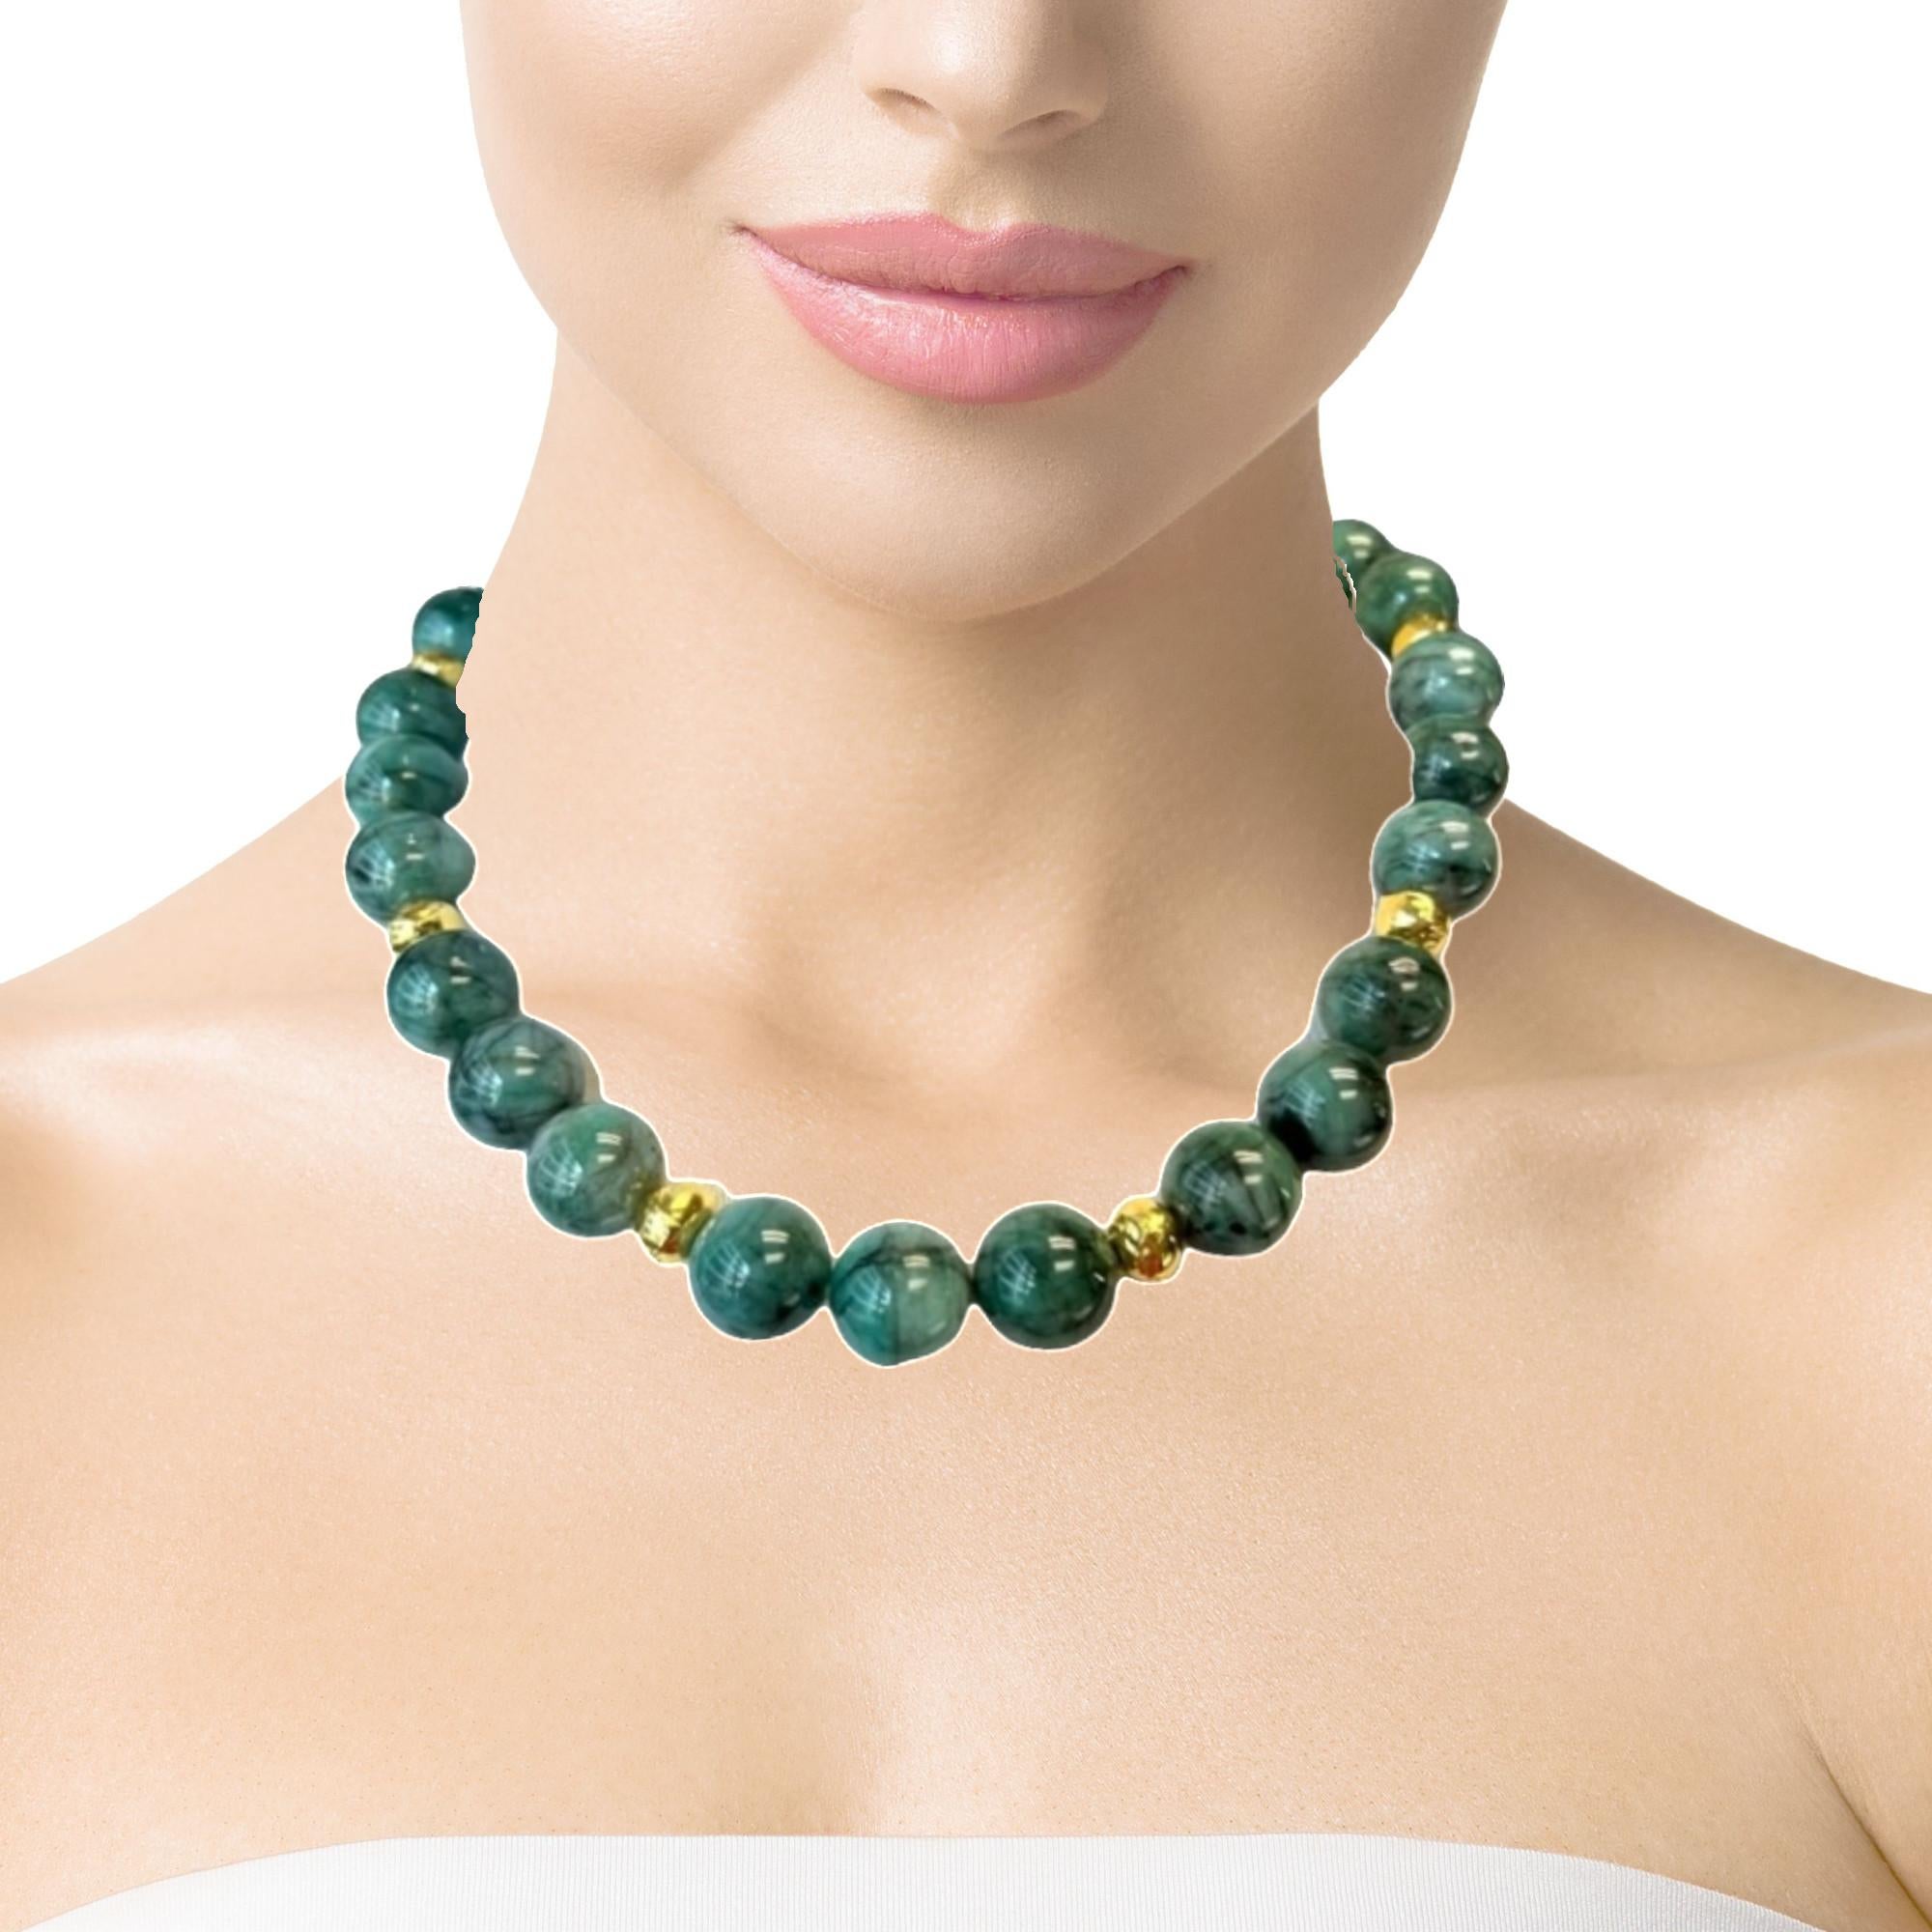 15mm Round Emerald Beaded Necklace with Yellow Gold Accents, 18 Inches For Sale 2